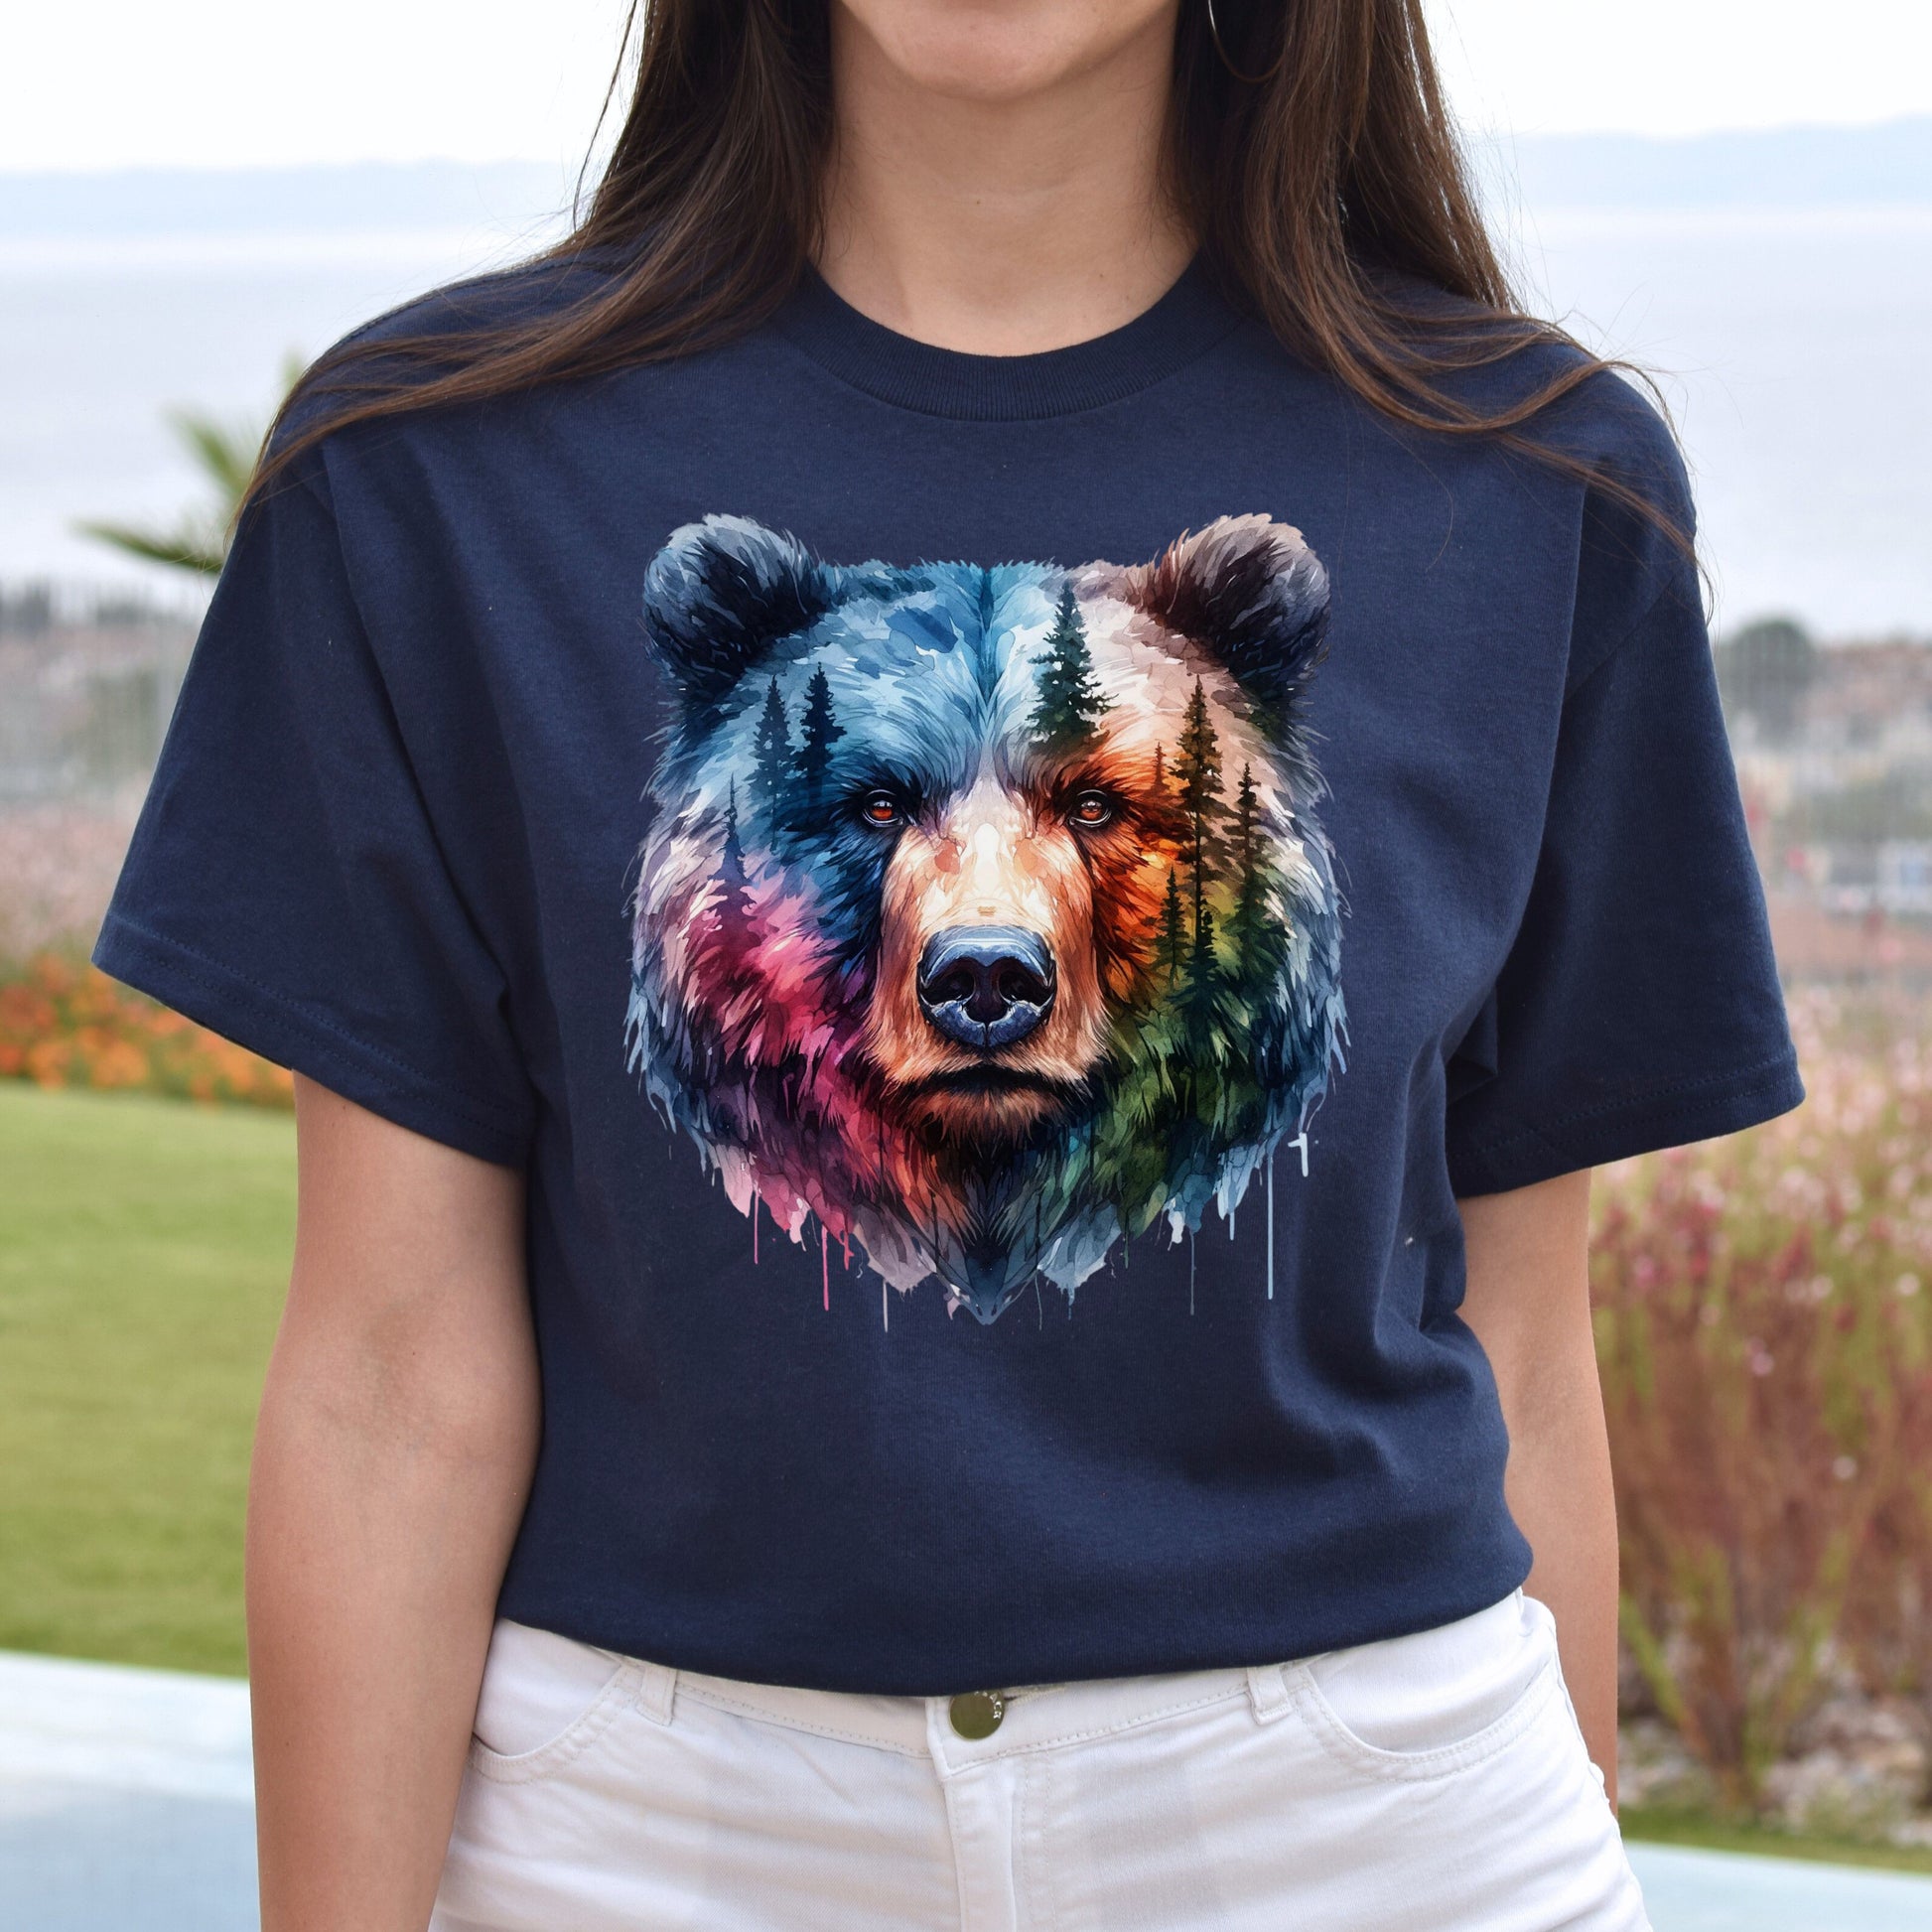 Grizzly and Forest Watercolor Unisex T-shirt Black Navy Dark Heather-Navy-Family-Gift-Planet